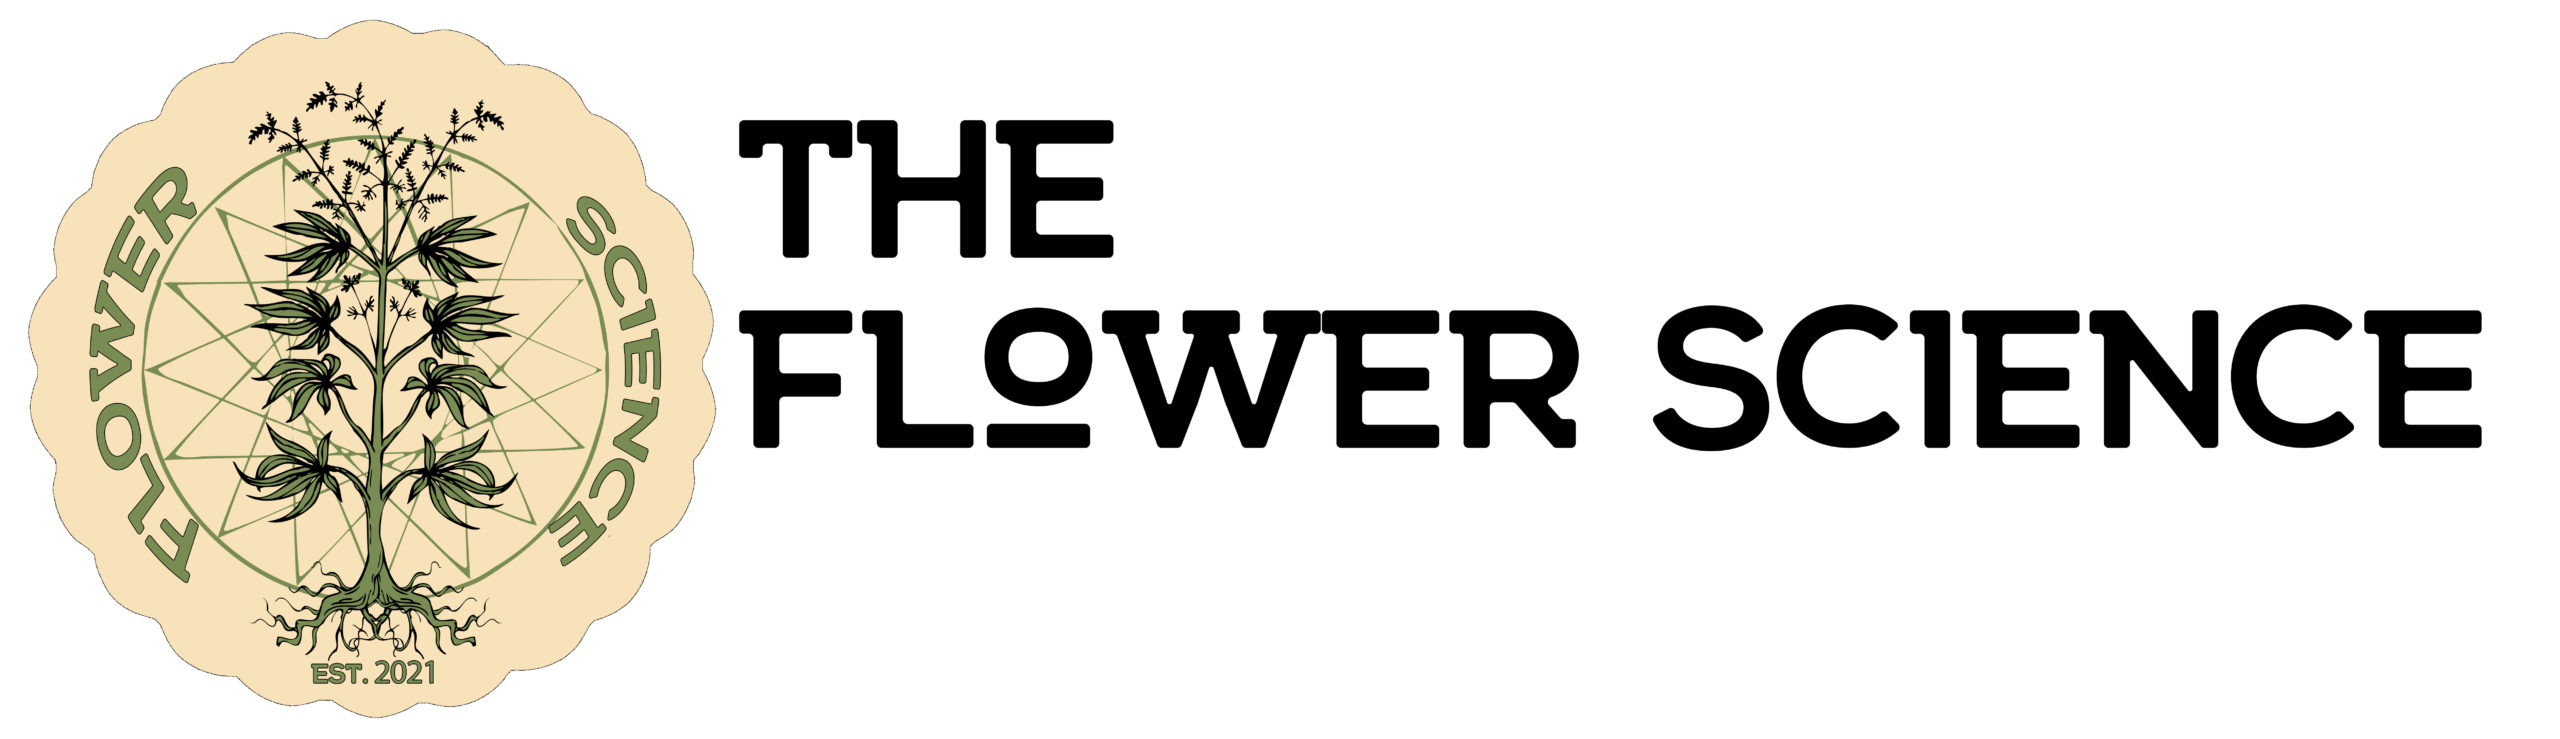 The Flower Science